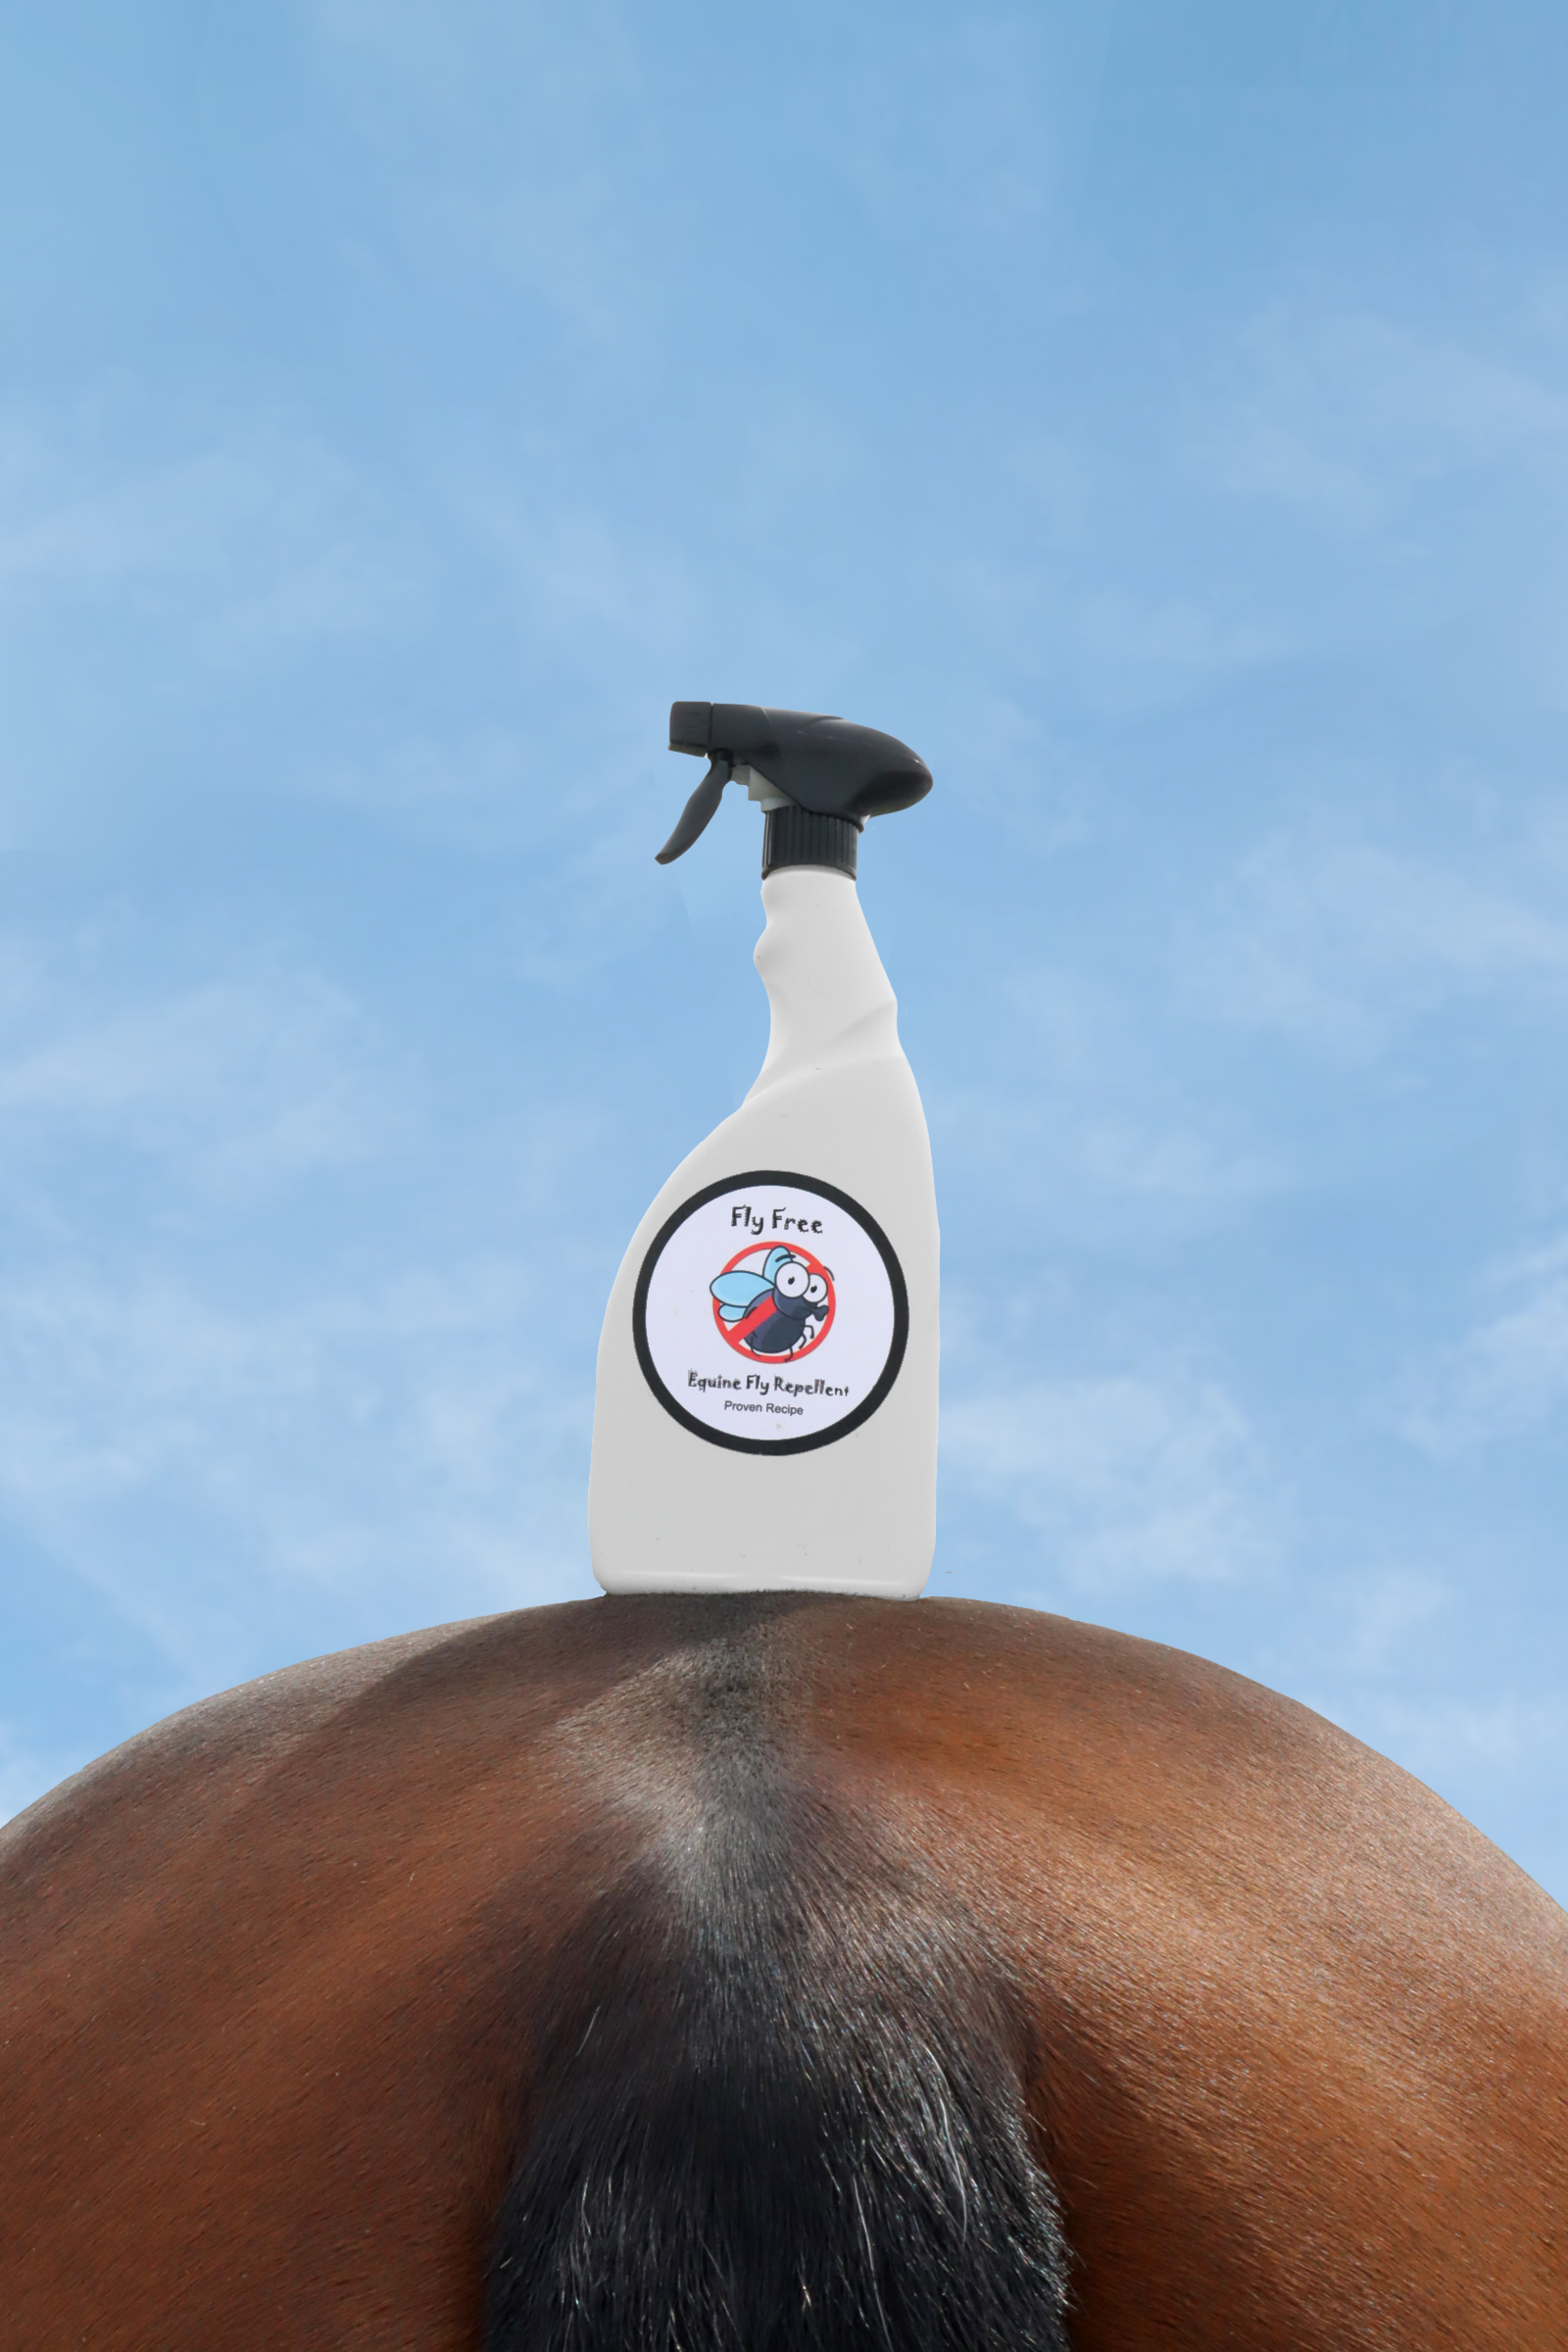 Fly Free Equine Fly Repellent